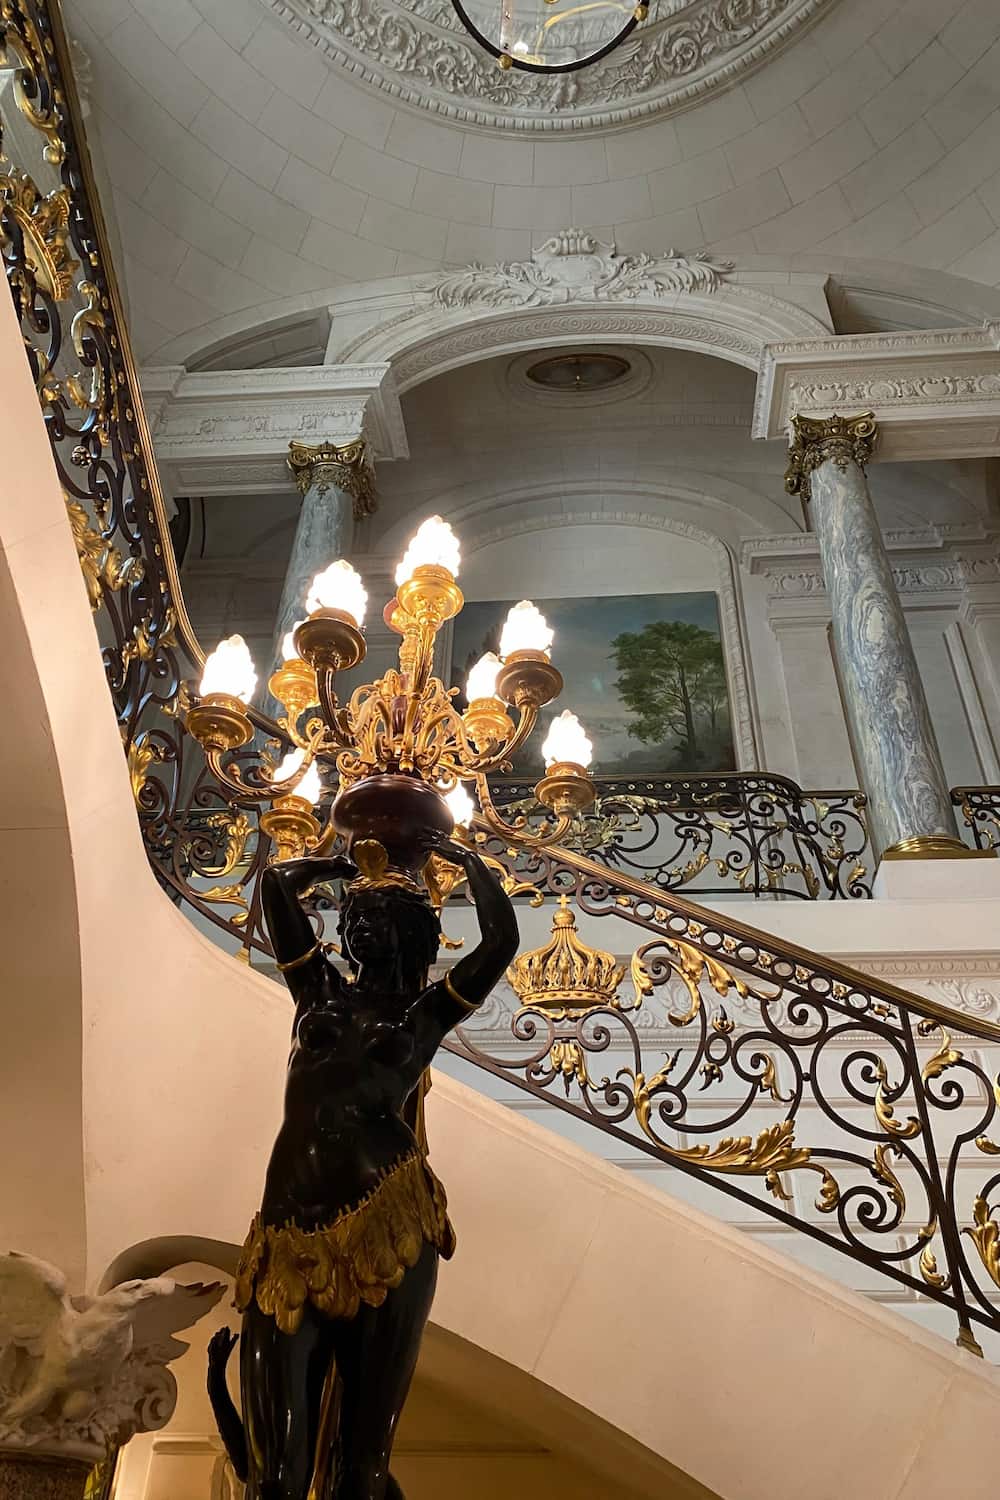 ornate staircase with lights and statue